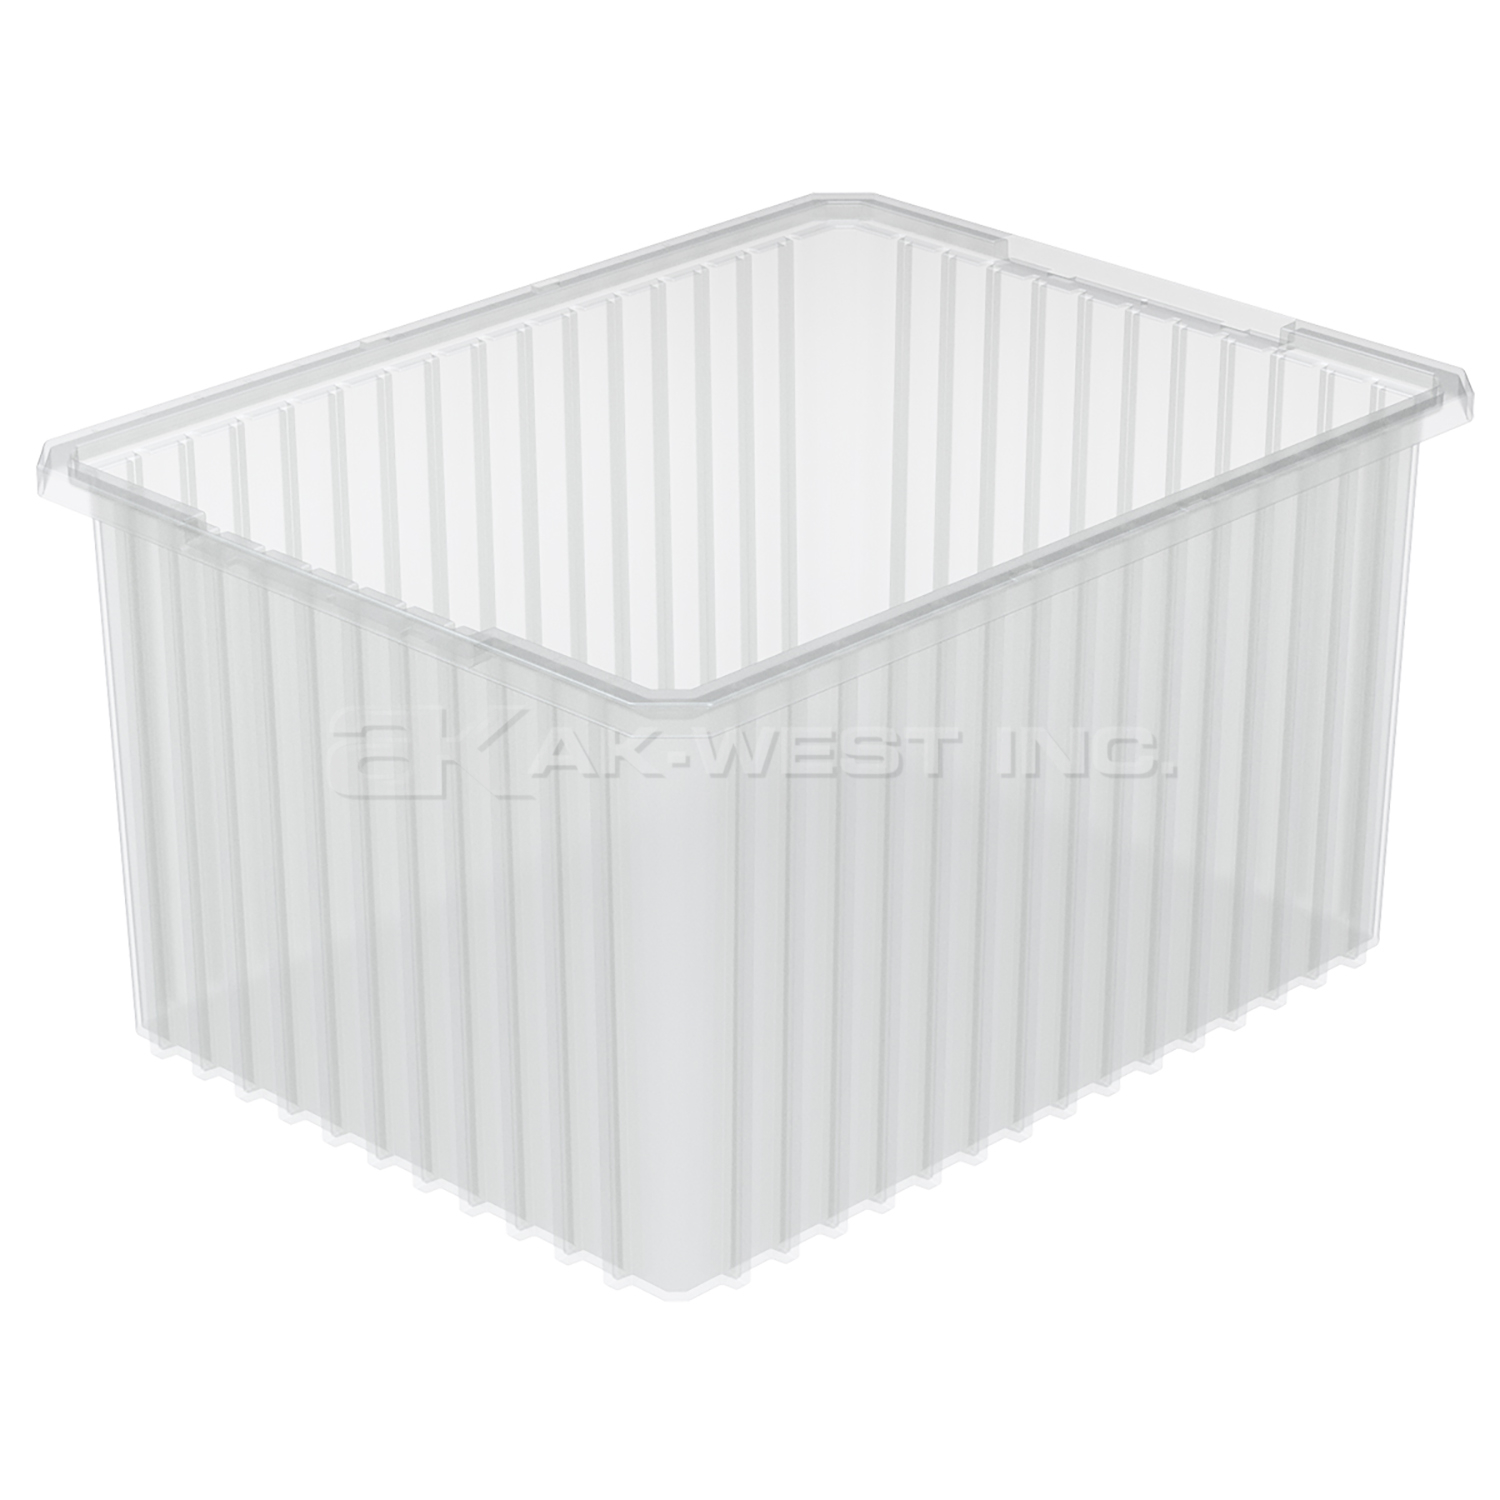 Clear, 22-1/2" x 17-3/8" x 12" Dividable Grid Container (3 Per Carton)